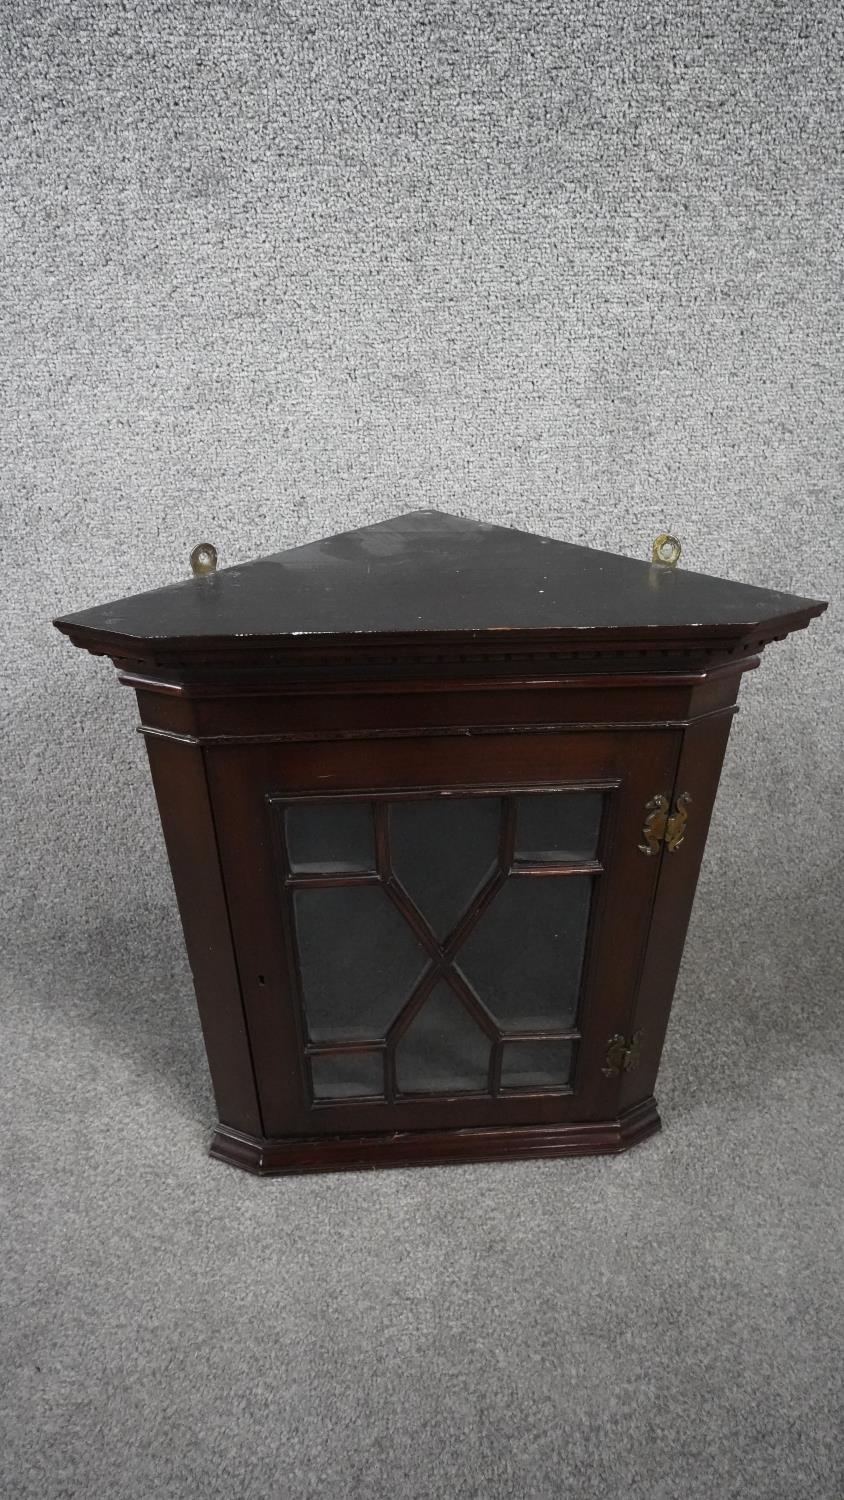 A 19th century mahogany hanging corner cabinet with astragal glazed door. H.52 W.44 D.25 (locked and - Image 2 of 7